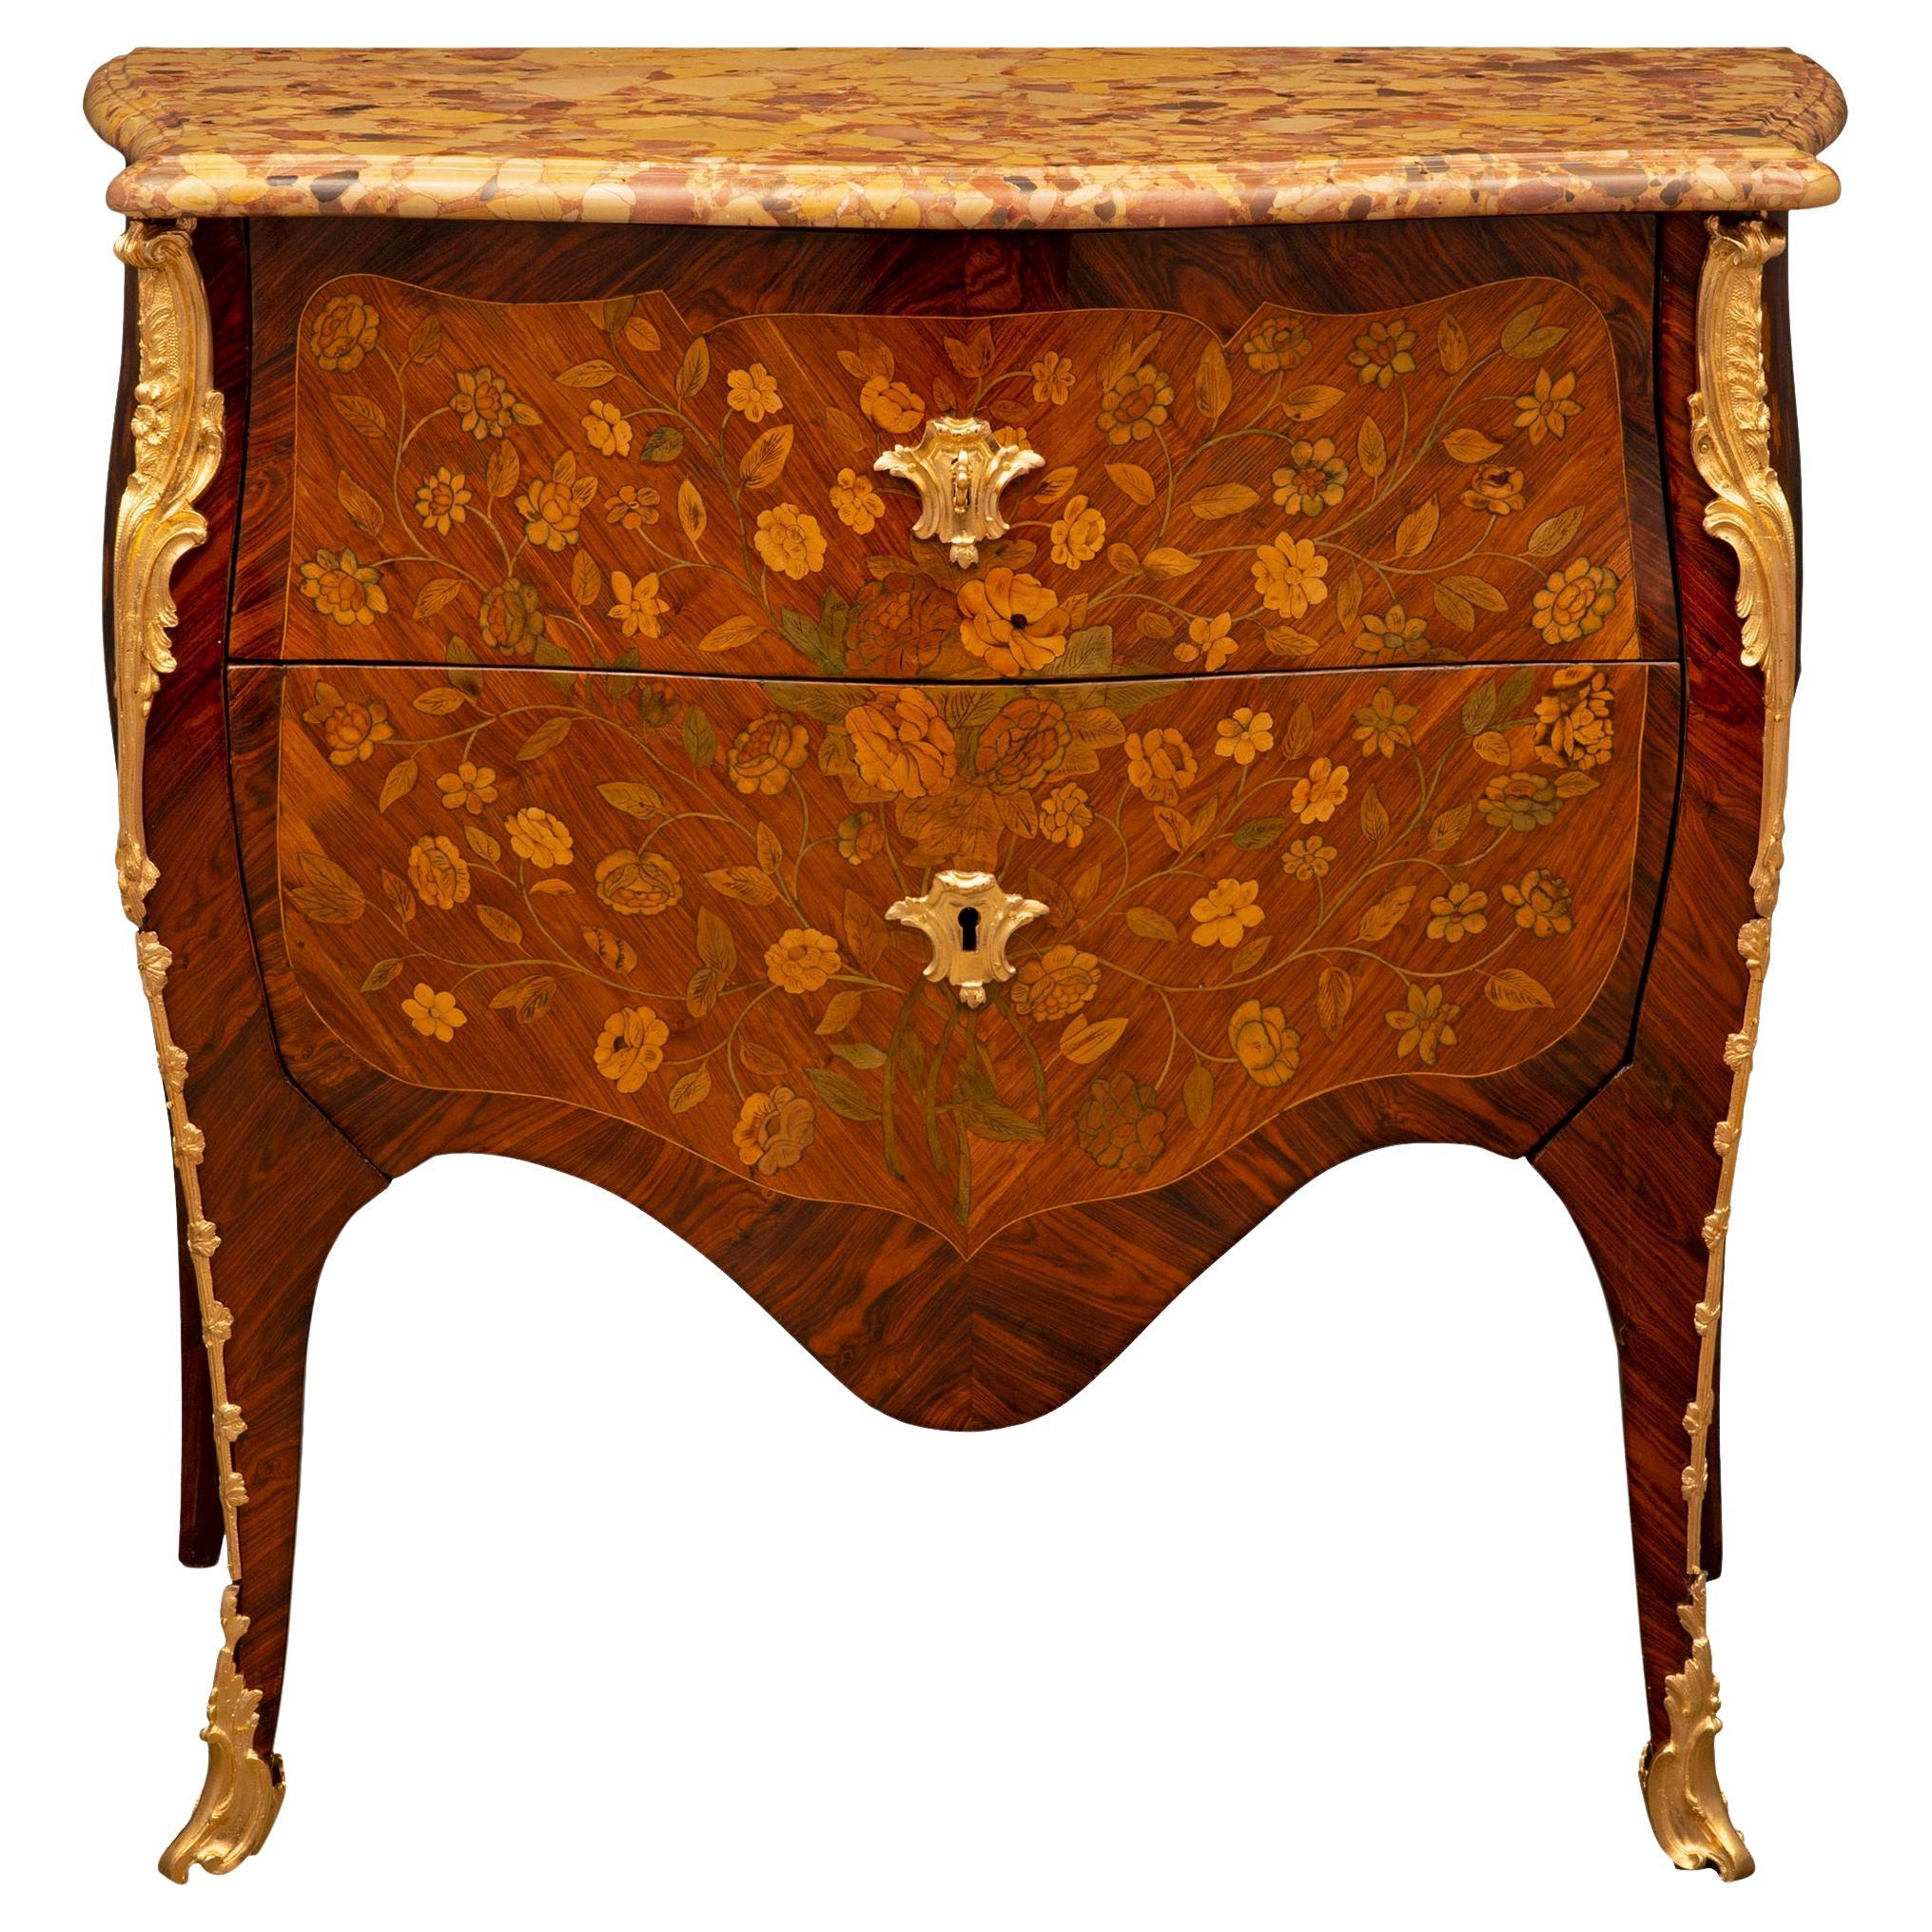 French 18th Century Louis XV Period Rosewood And Brèche D’Alep Marble Commode